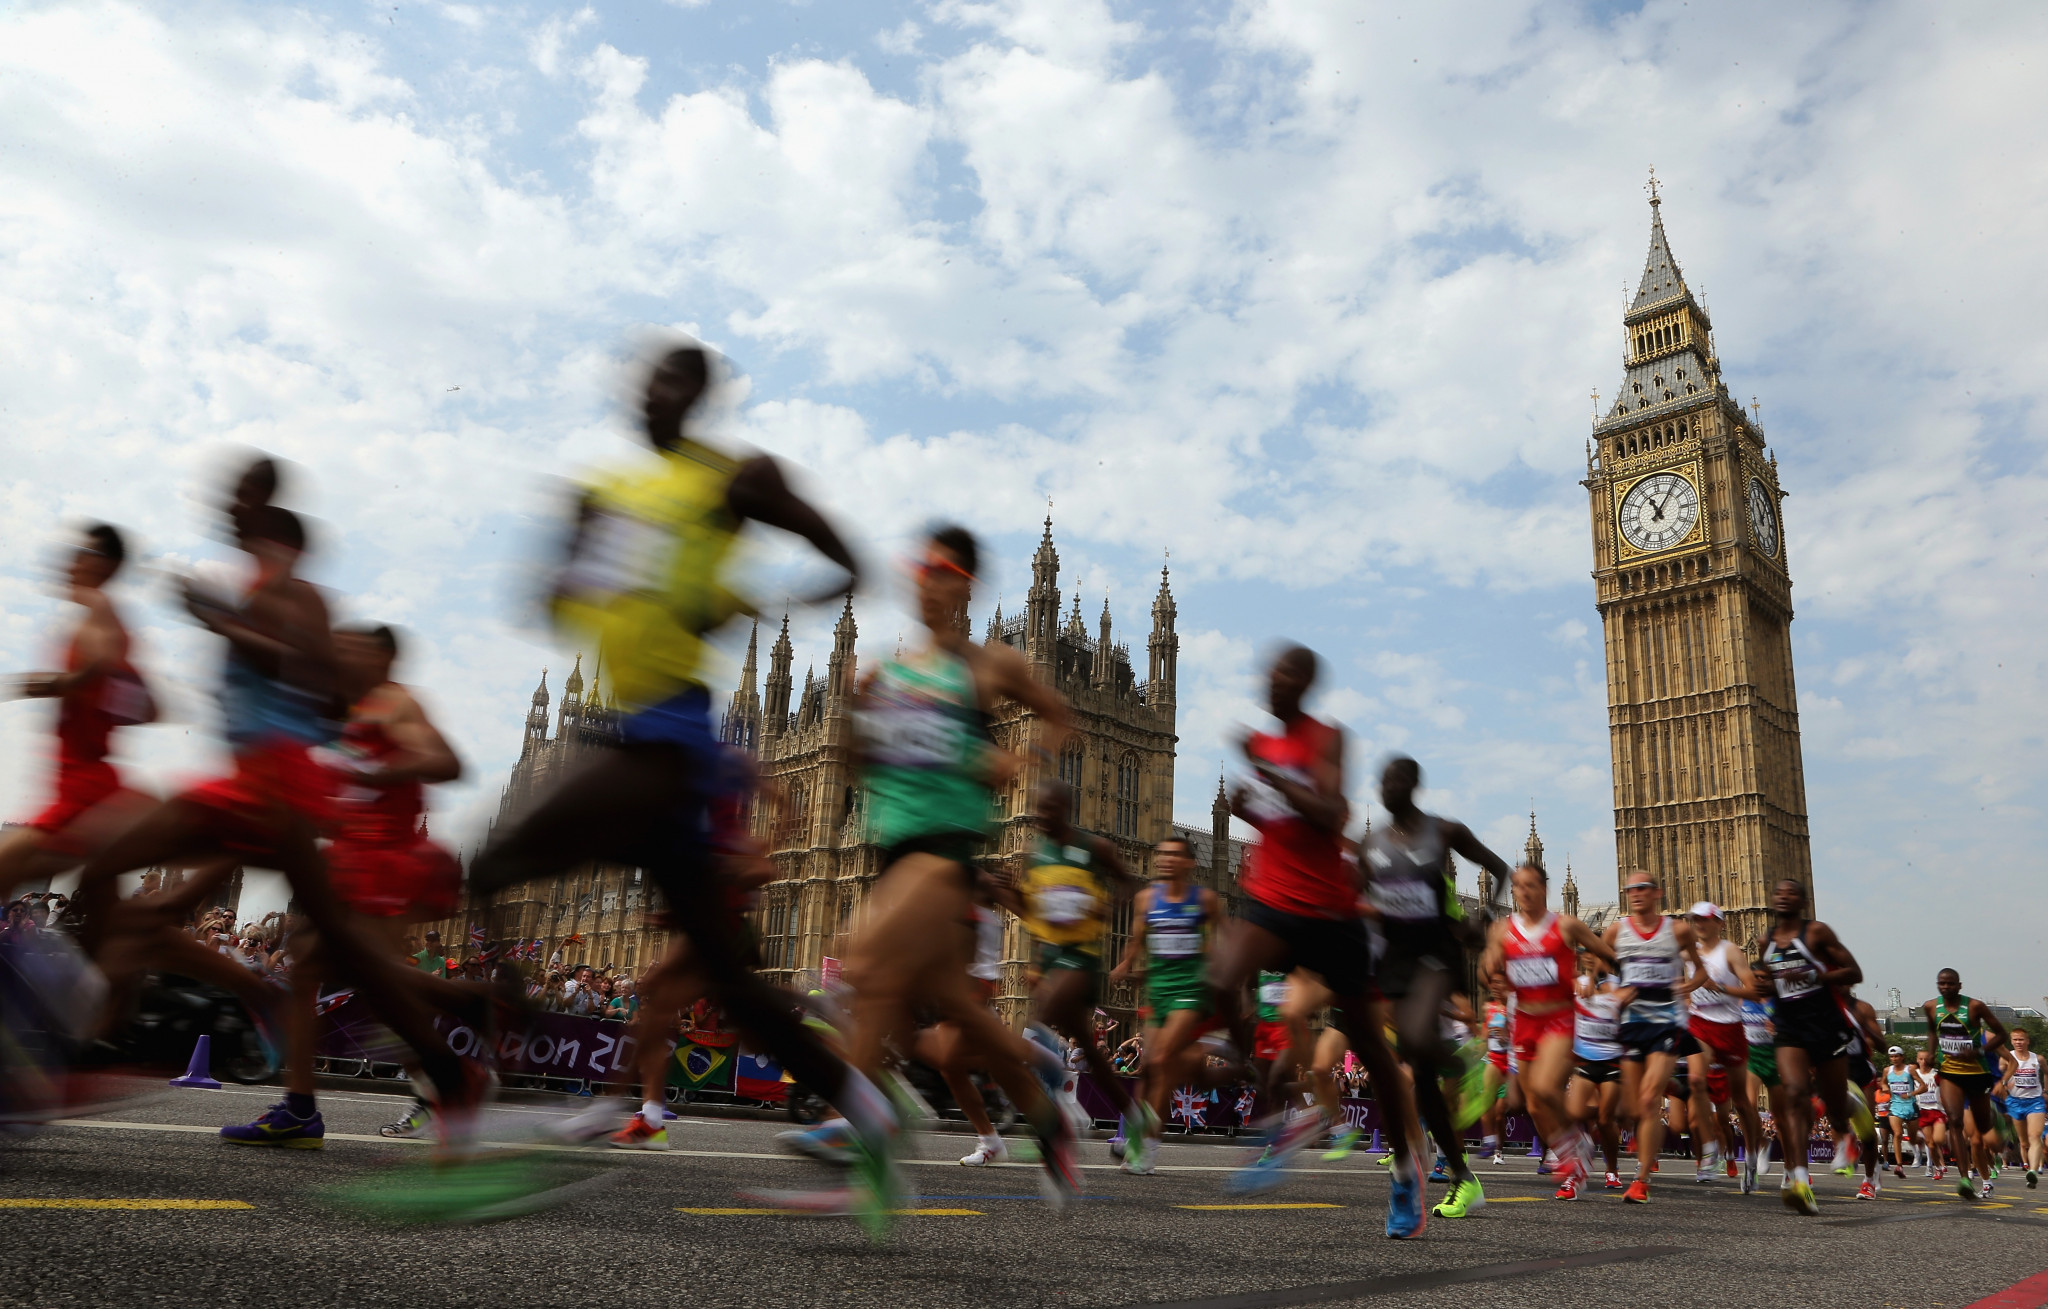 Rail strikes are set to take place on the same weekend as the London Marathon ©Getty Images